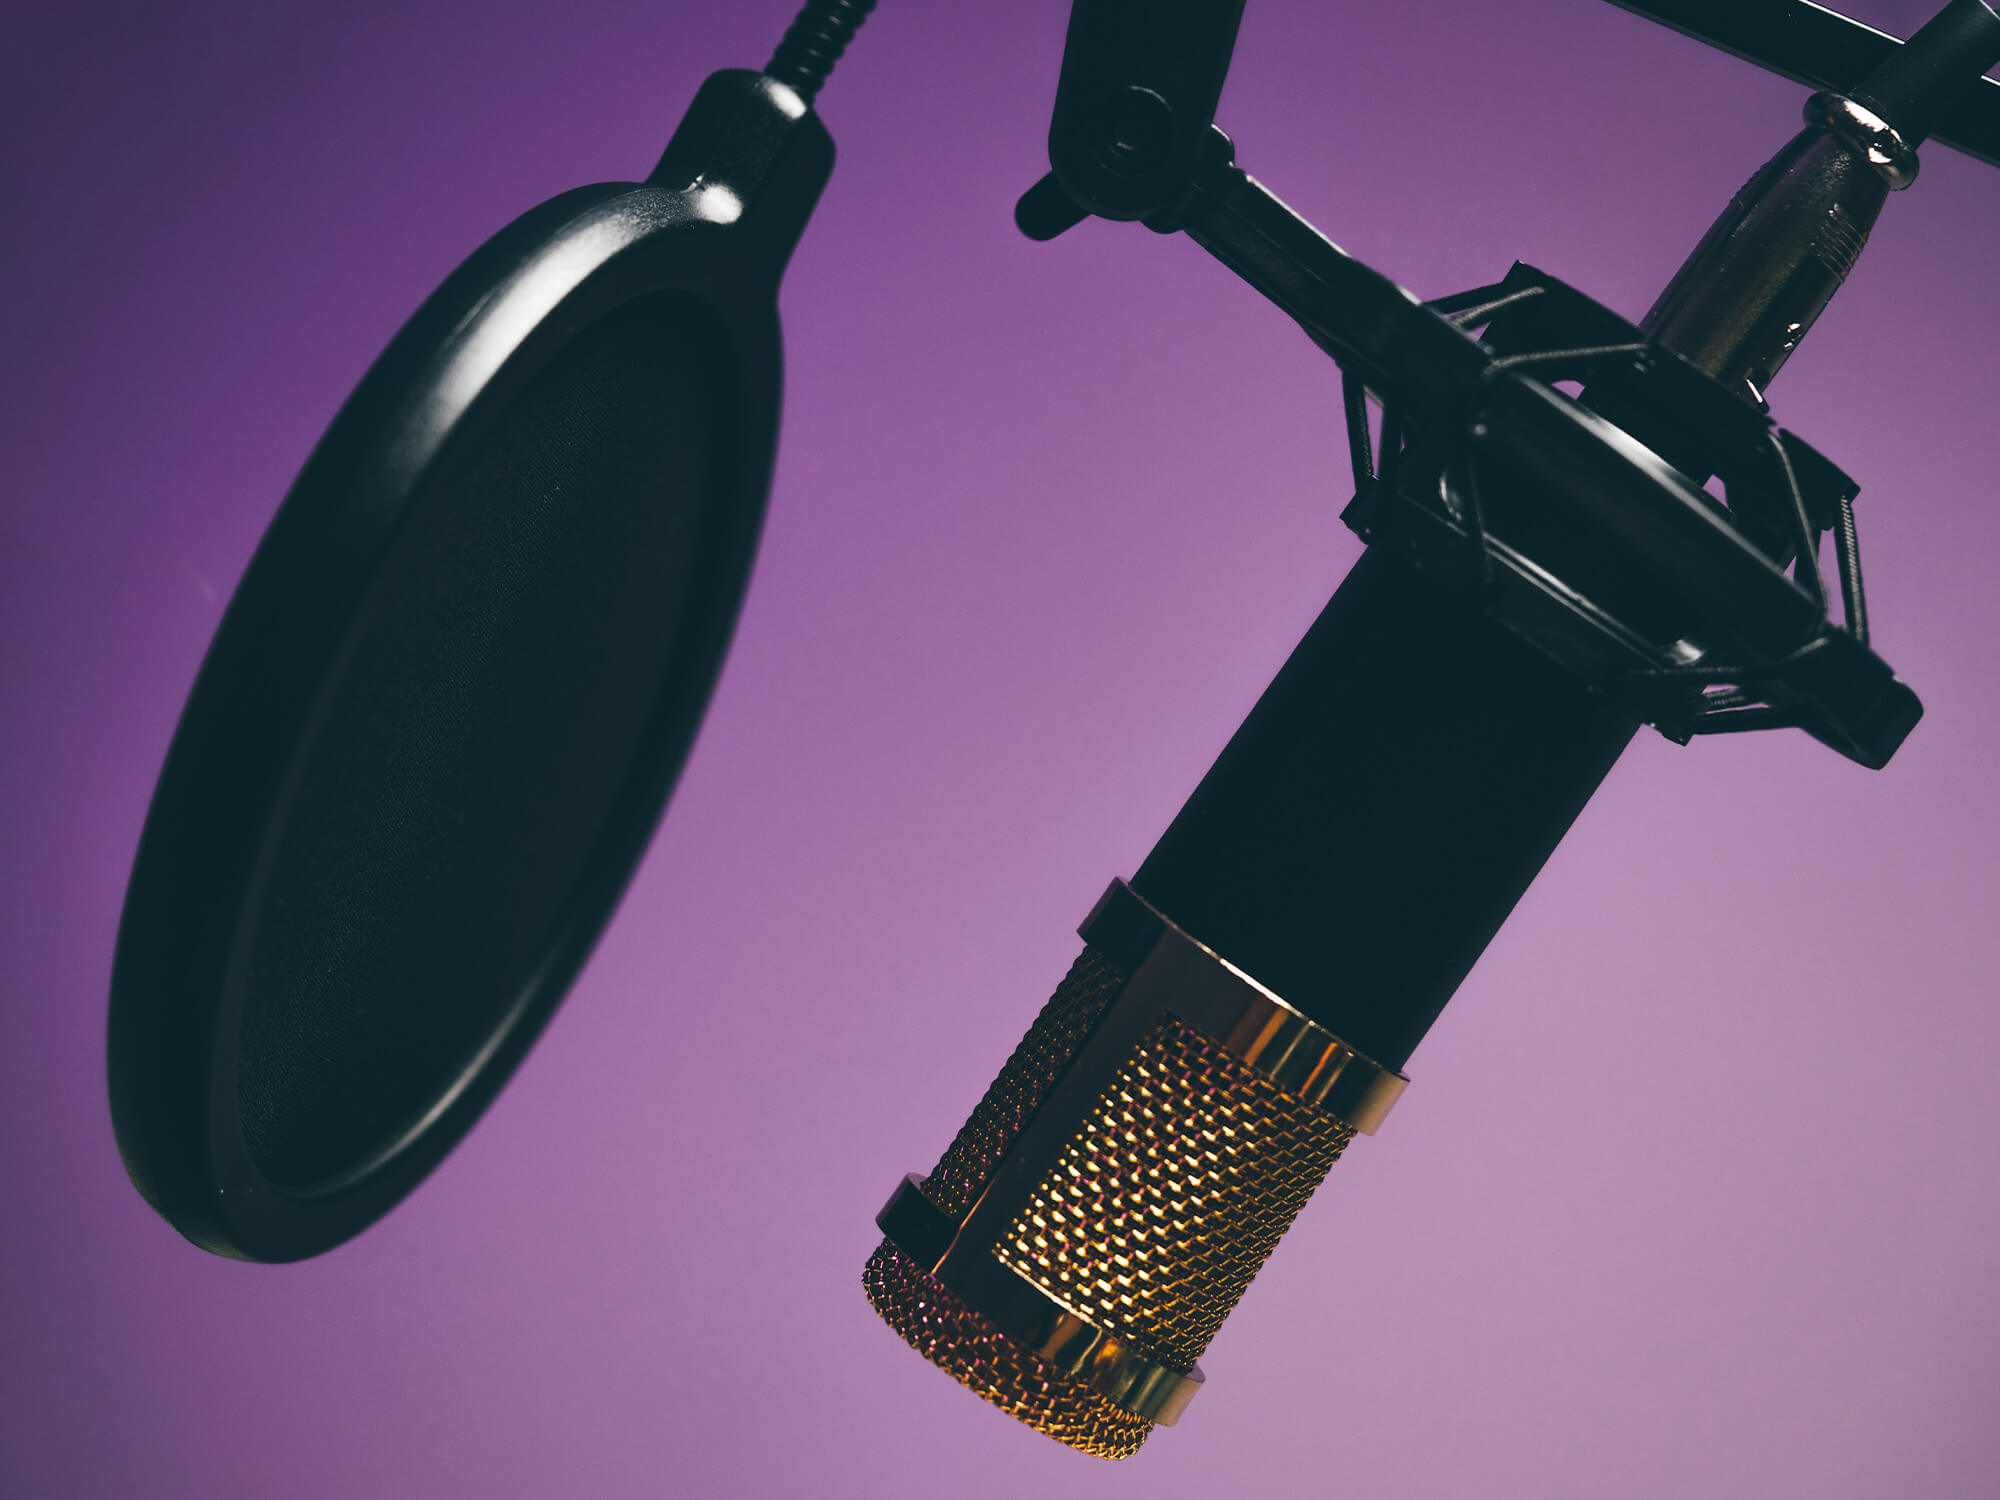 A stock photo of a microphone and pop filter in front of a purple background